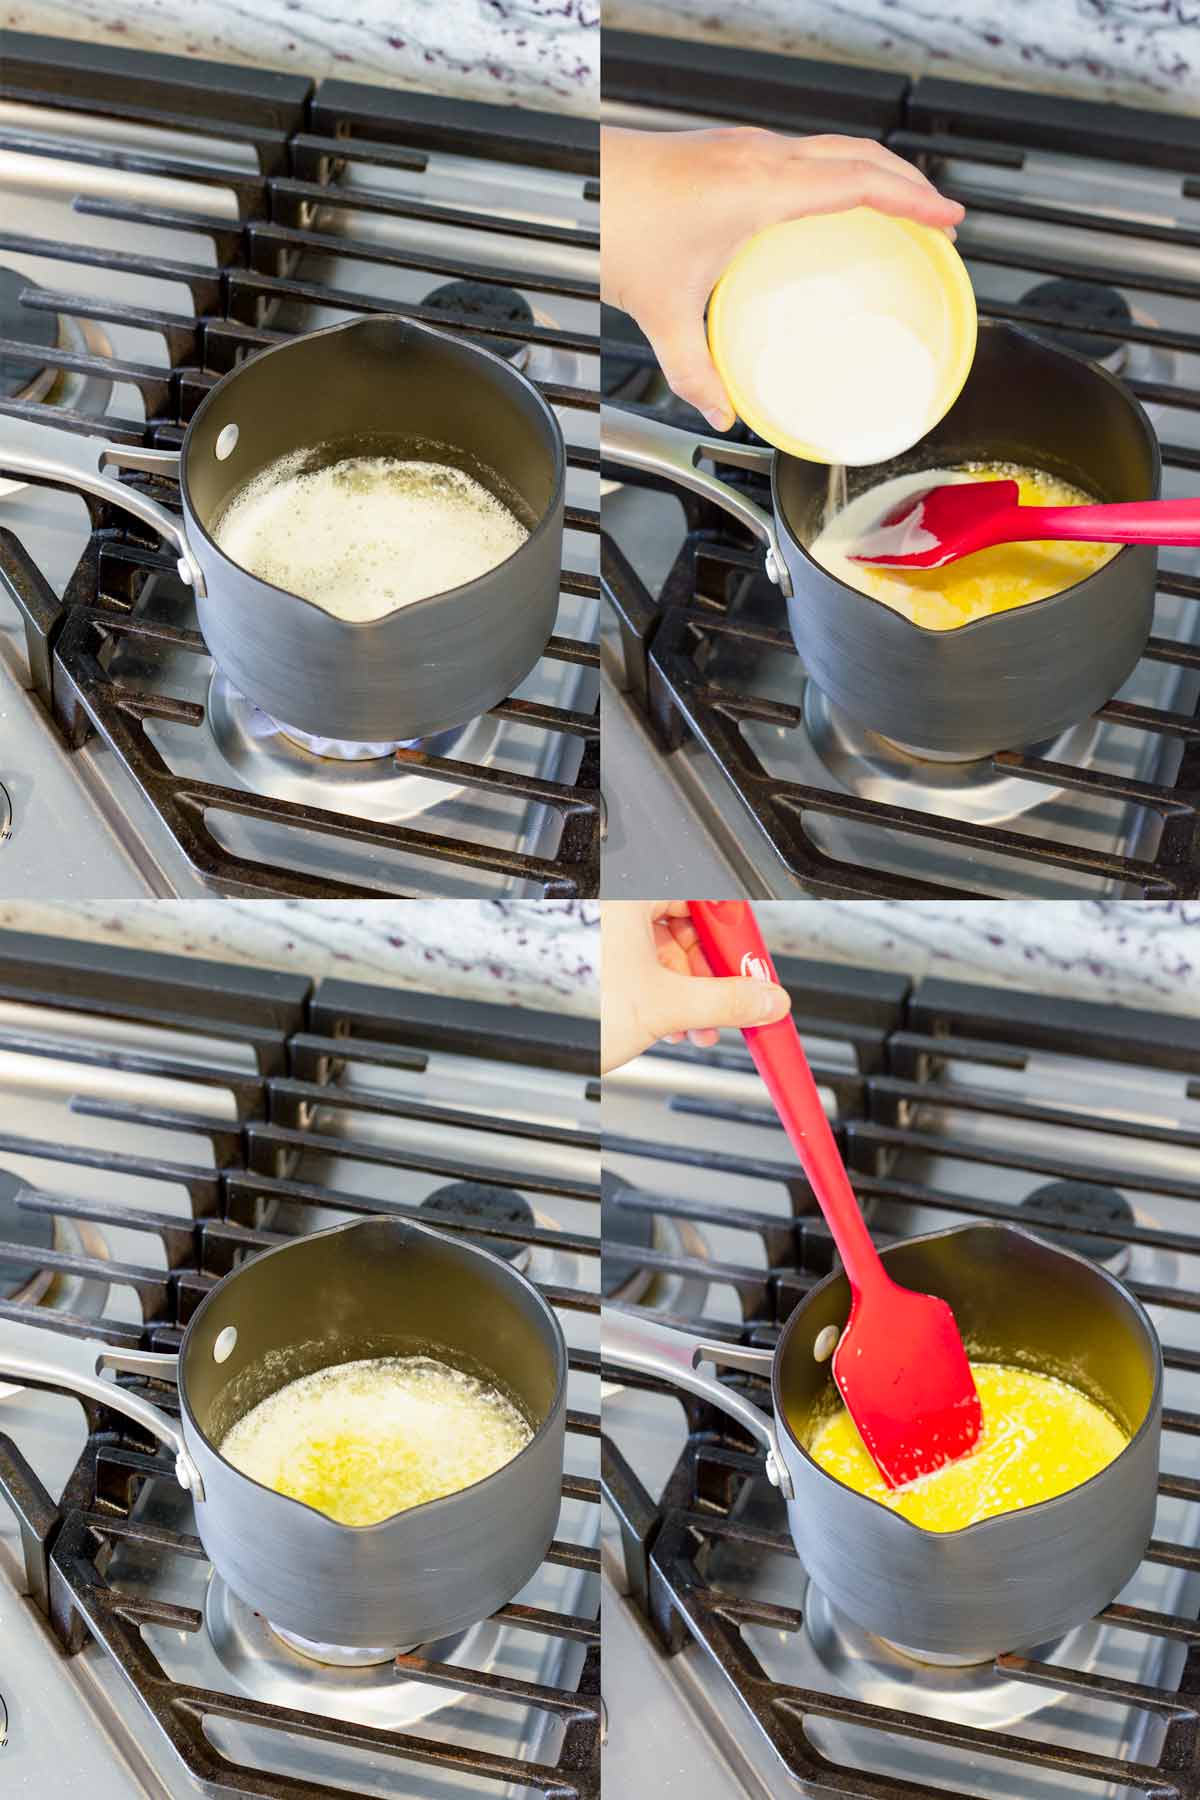 Making the heavy cream and butter mixture